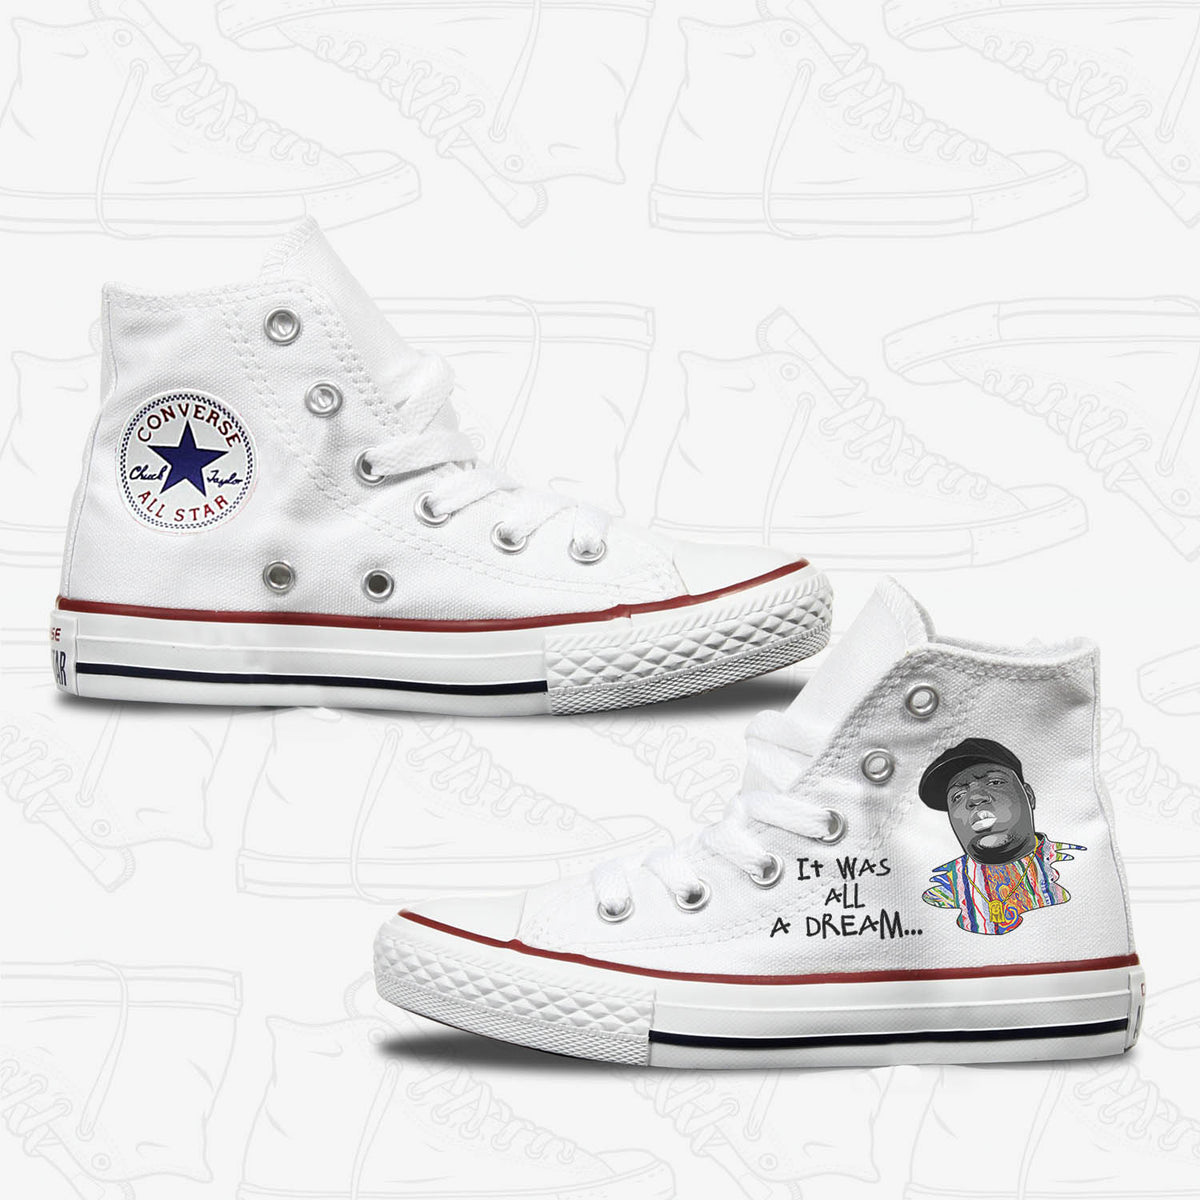 Notorious BIG Toddler Custom Converse Shoes